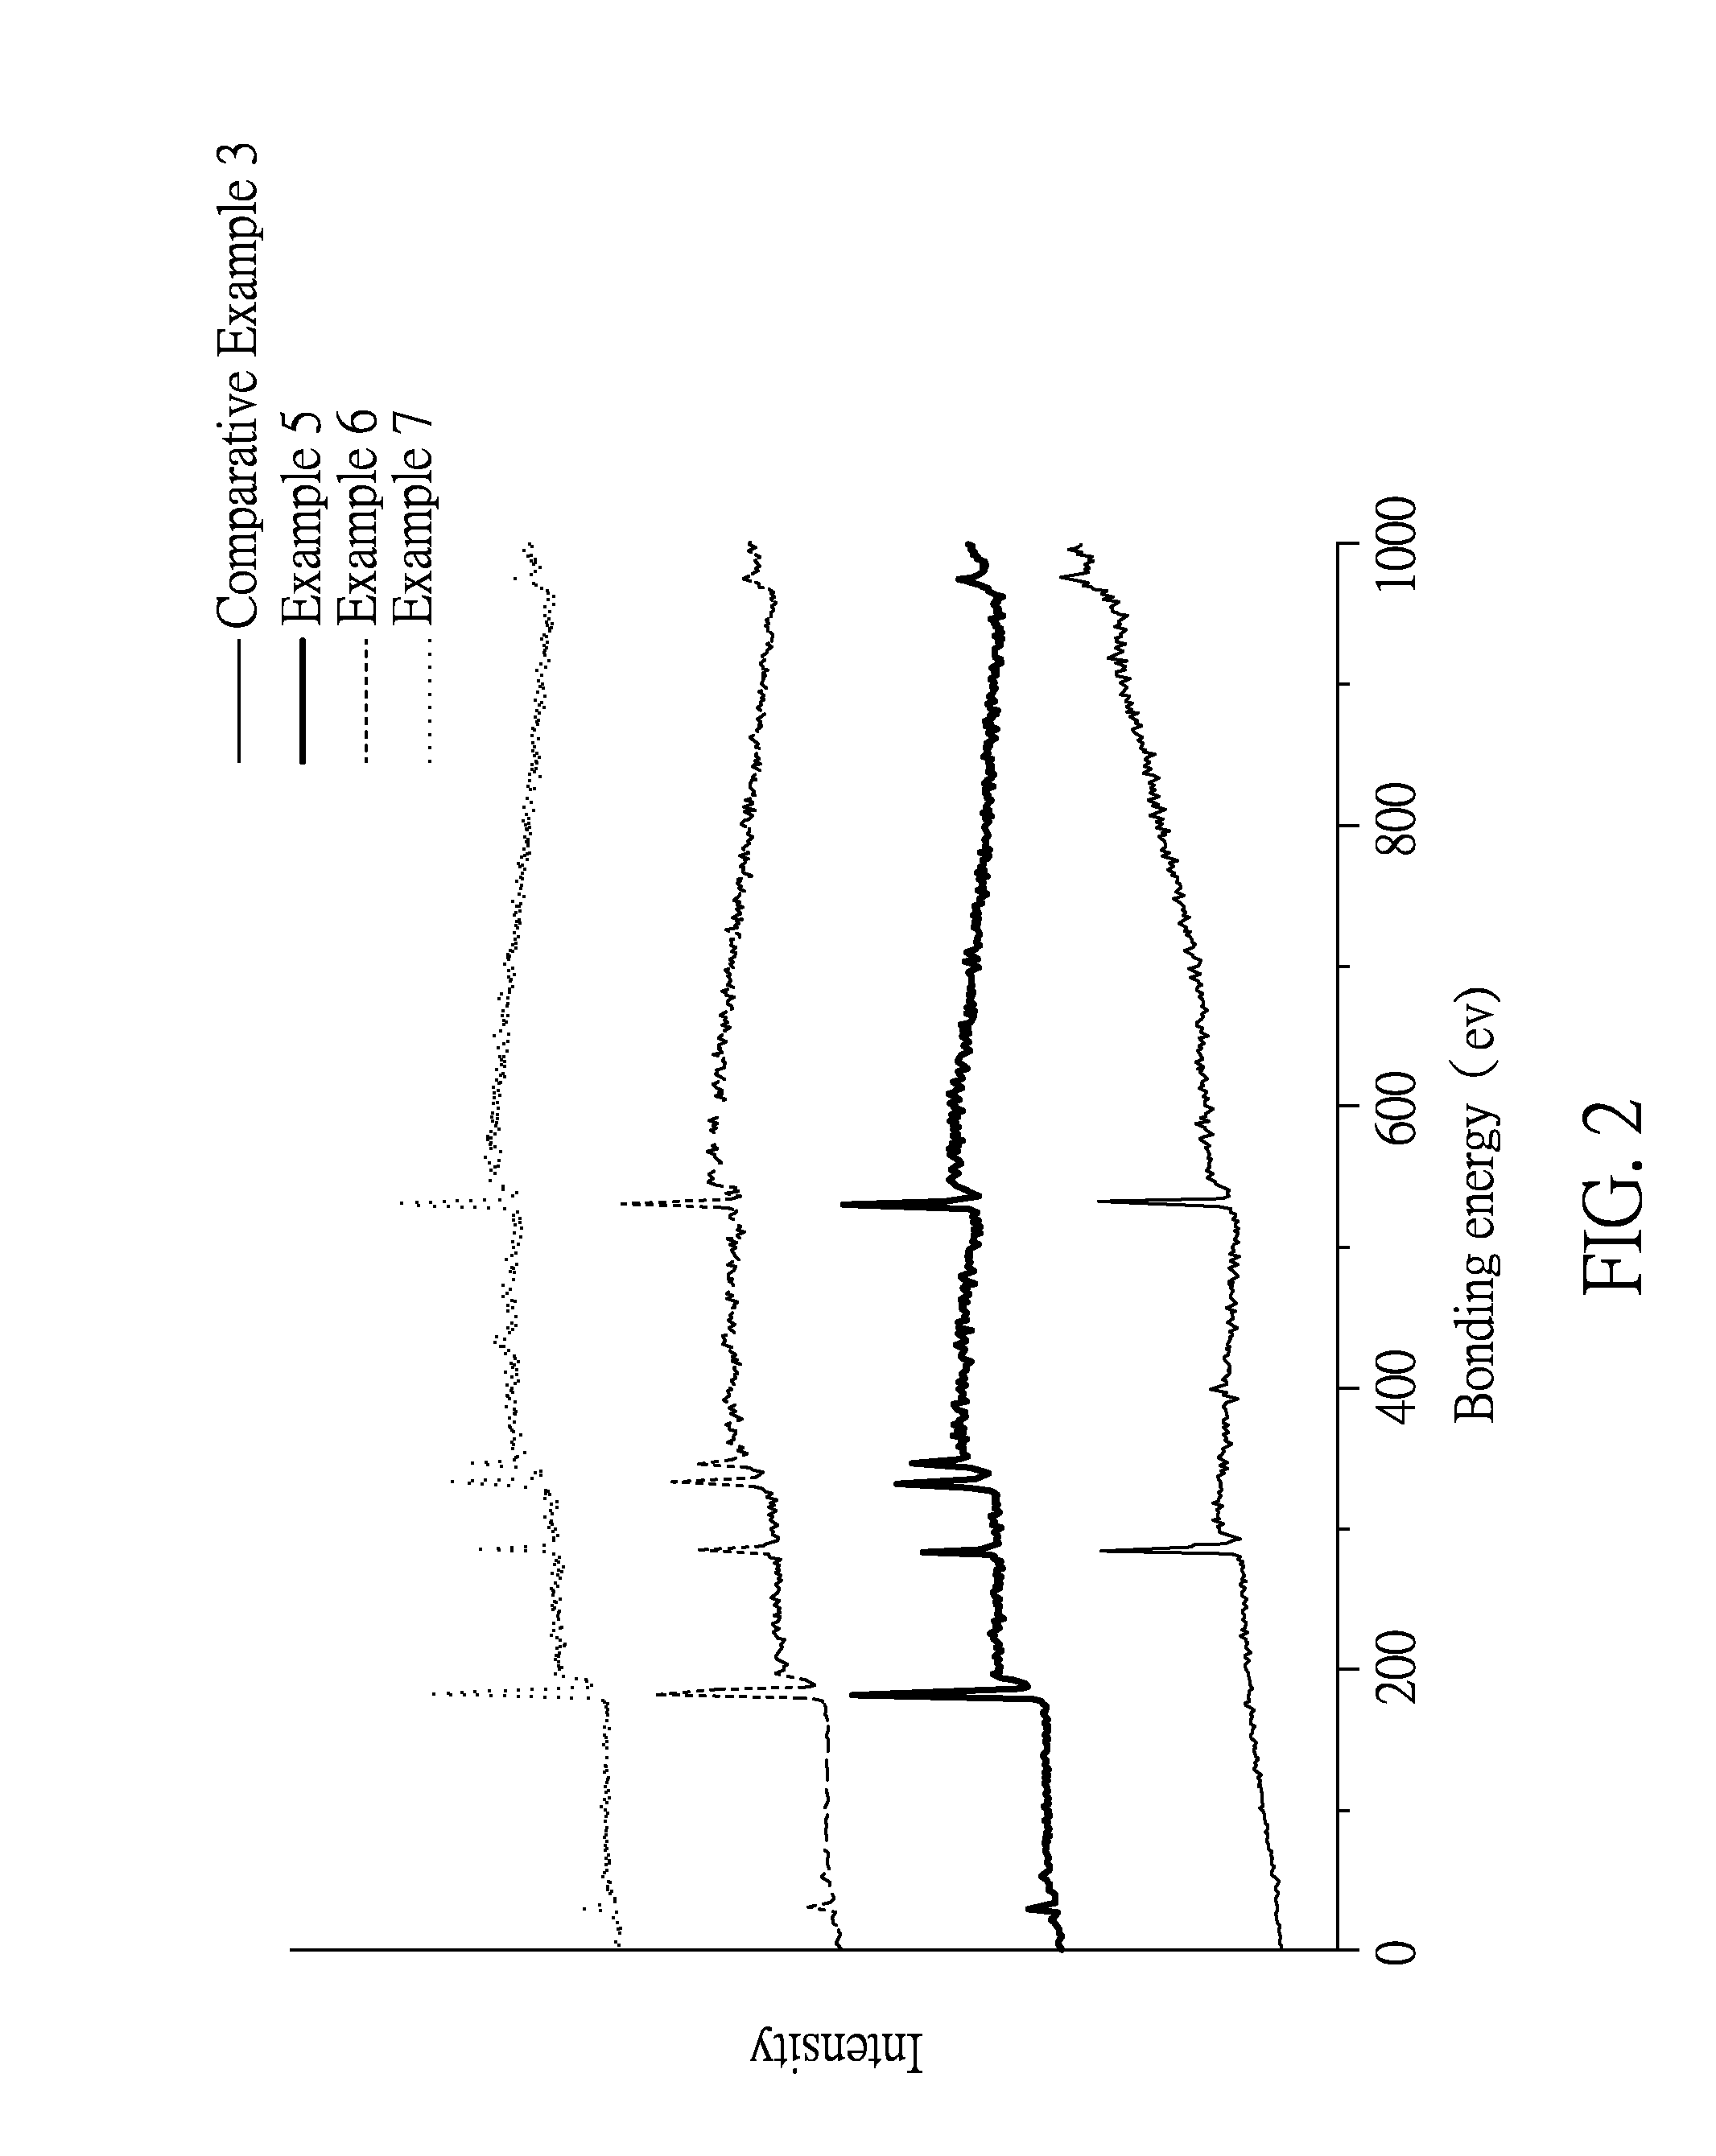 Surface treatment method for implant